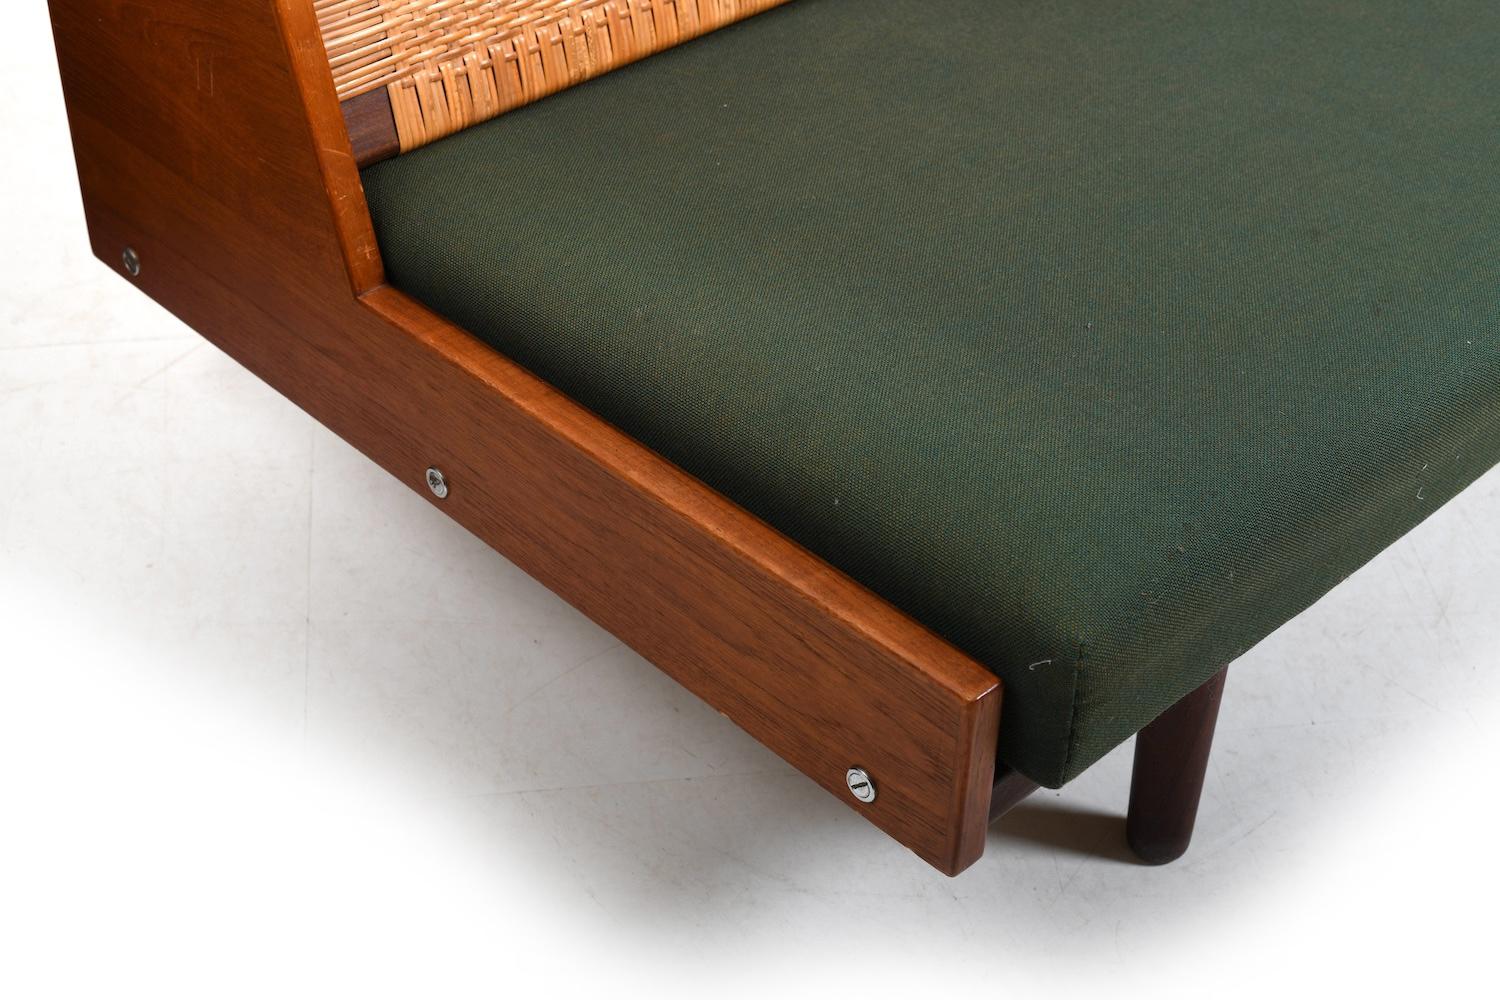 Daybed GE-258 in teak by Hans J. Wegner for Getama Denmark 1954. Backrest in wicker cane. Original mattress with green fabric. Early production 1950s. With beatiful patina and round legs.